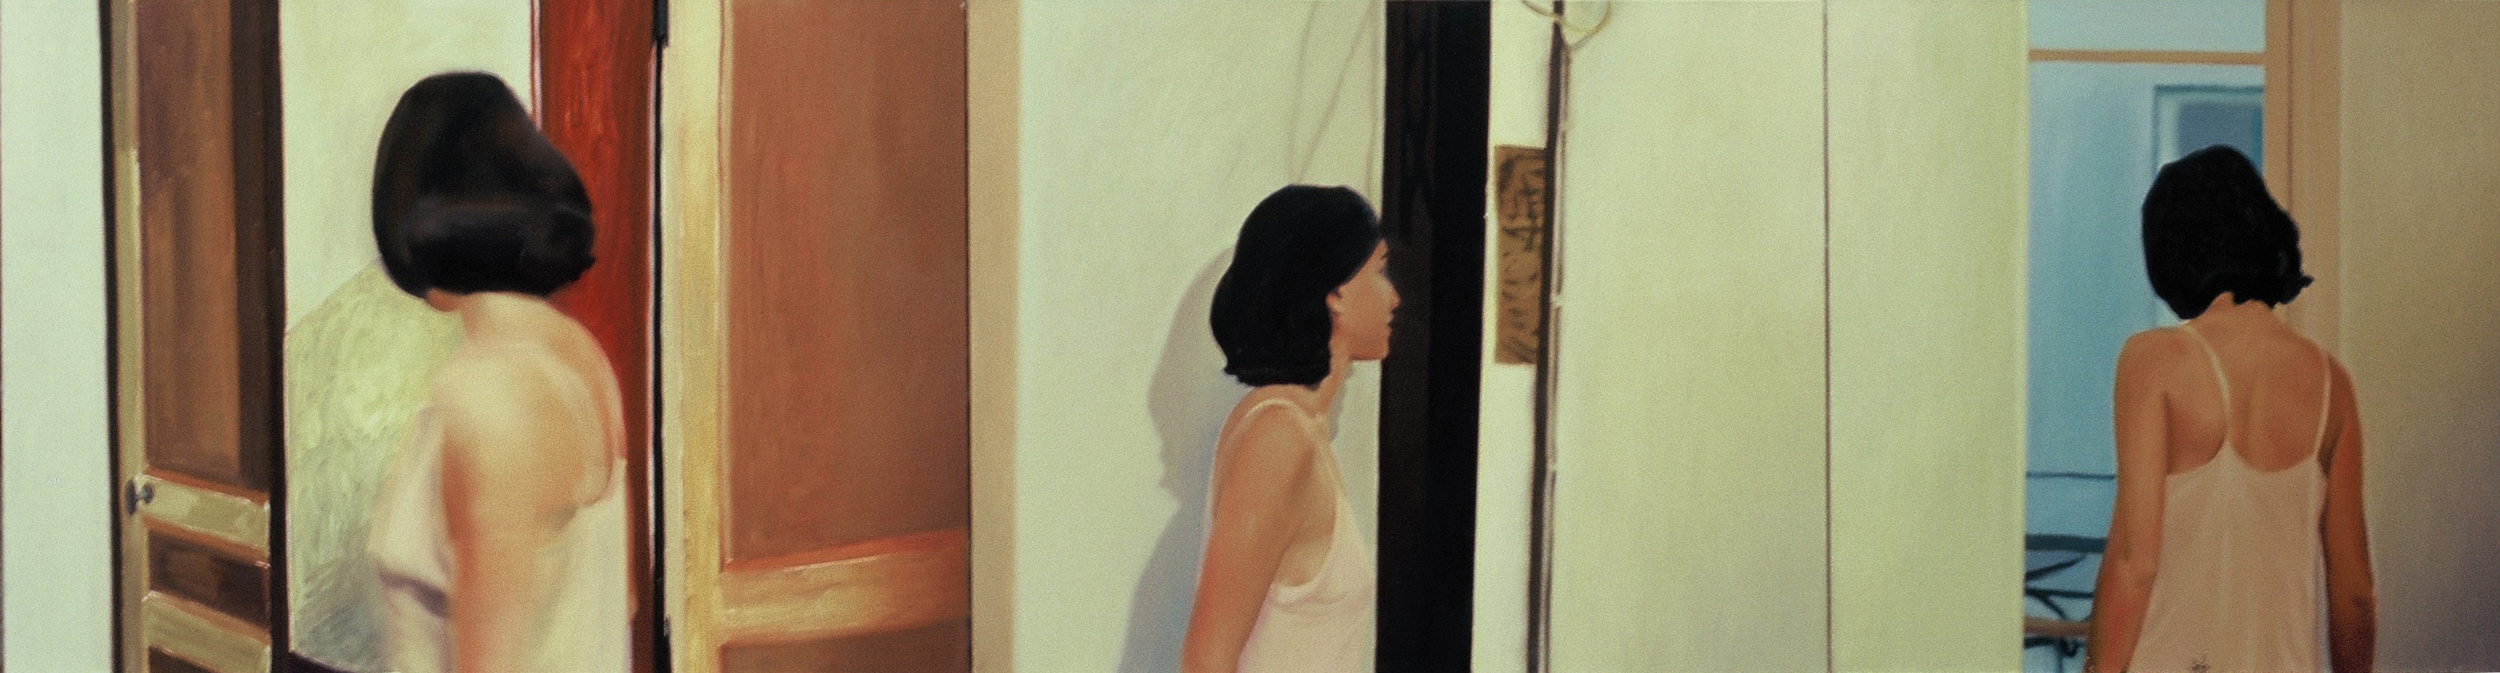   Untitled , 1999, oil on canvas, 96 x 380cm (triptych). Private collection, France 